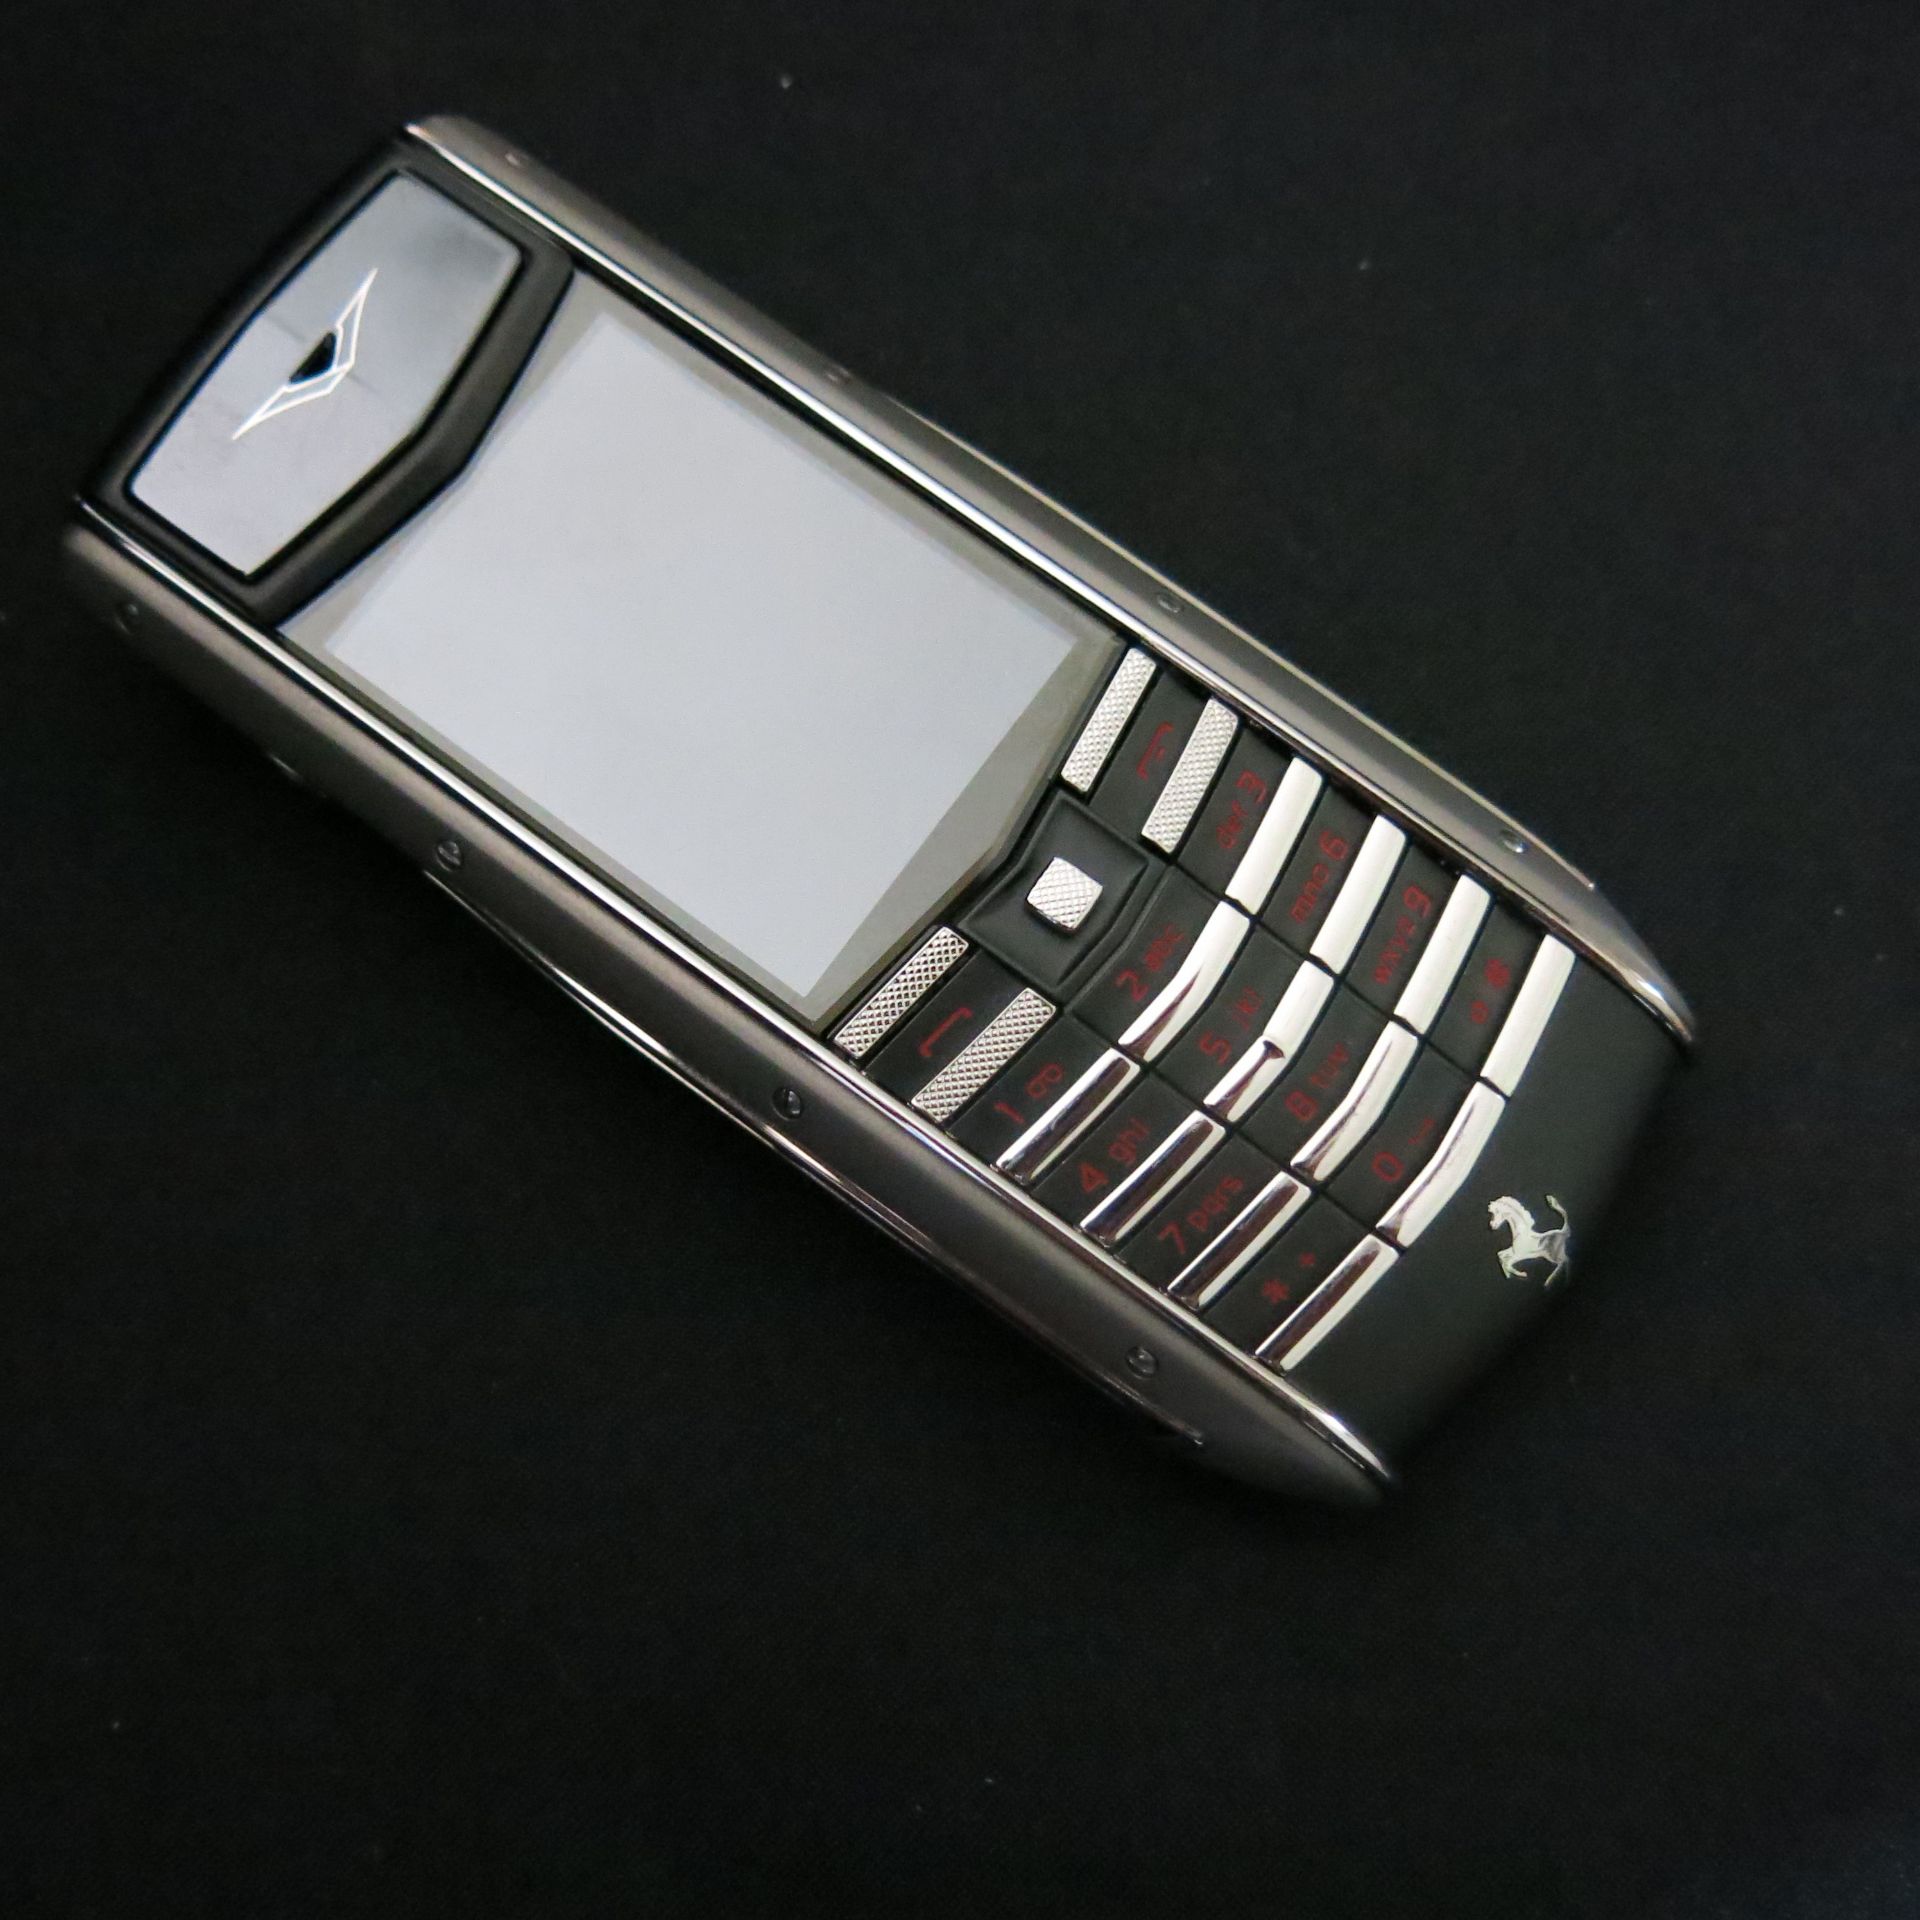 Entire Contents of the VERTU Museum Collection to Include: 105 Various Iconic Phones & Appearance - Image 56 of 106